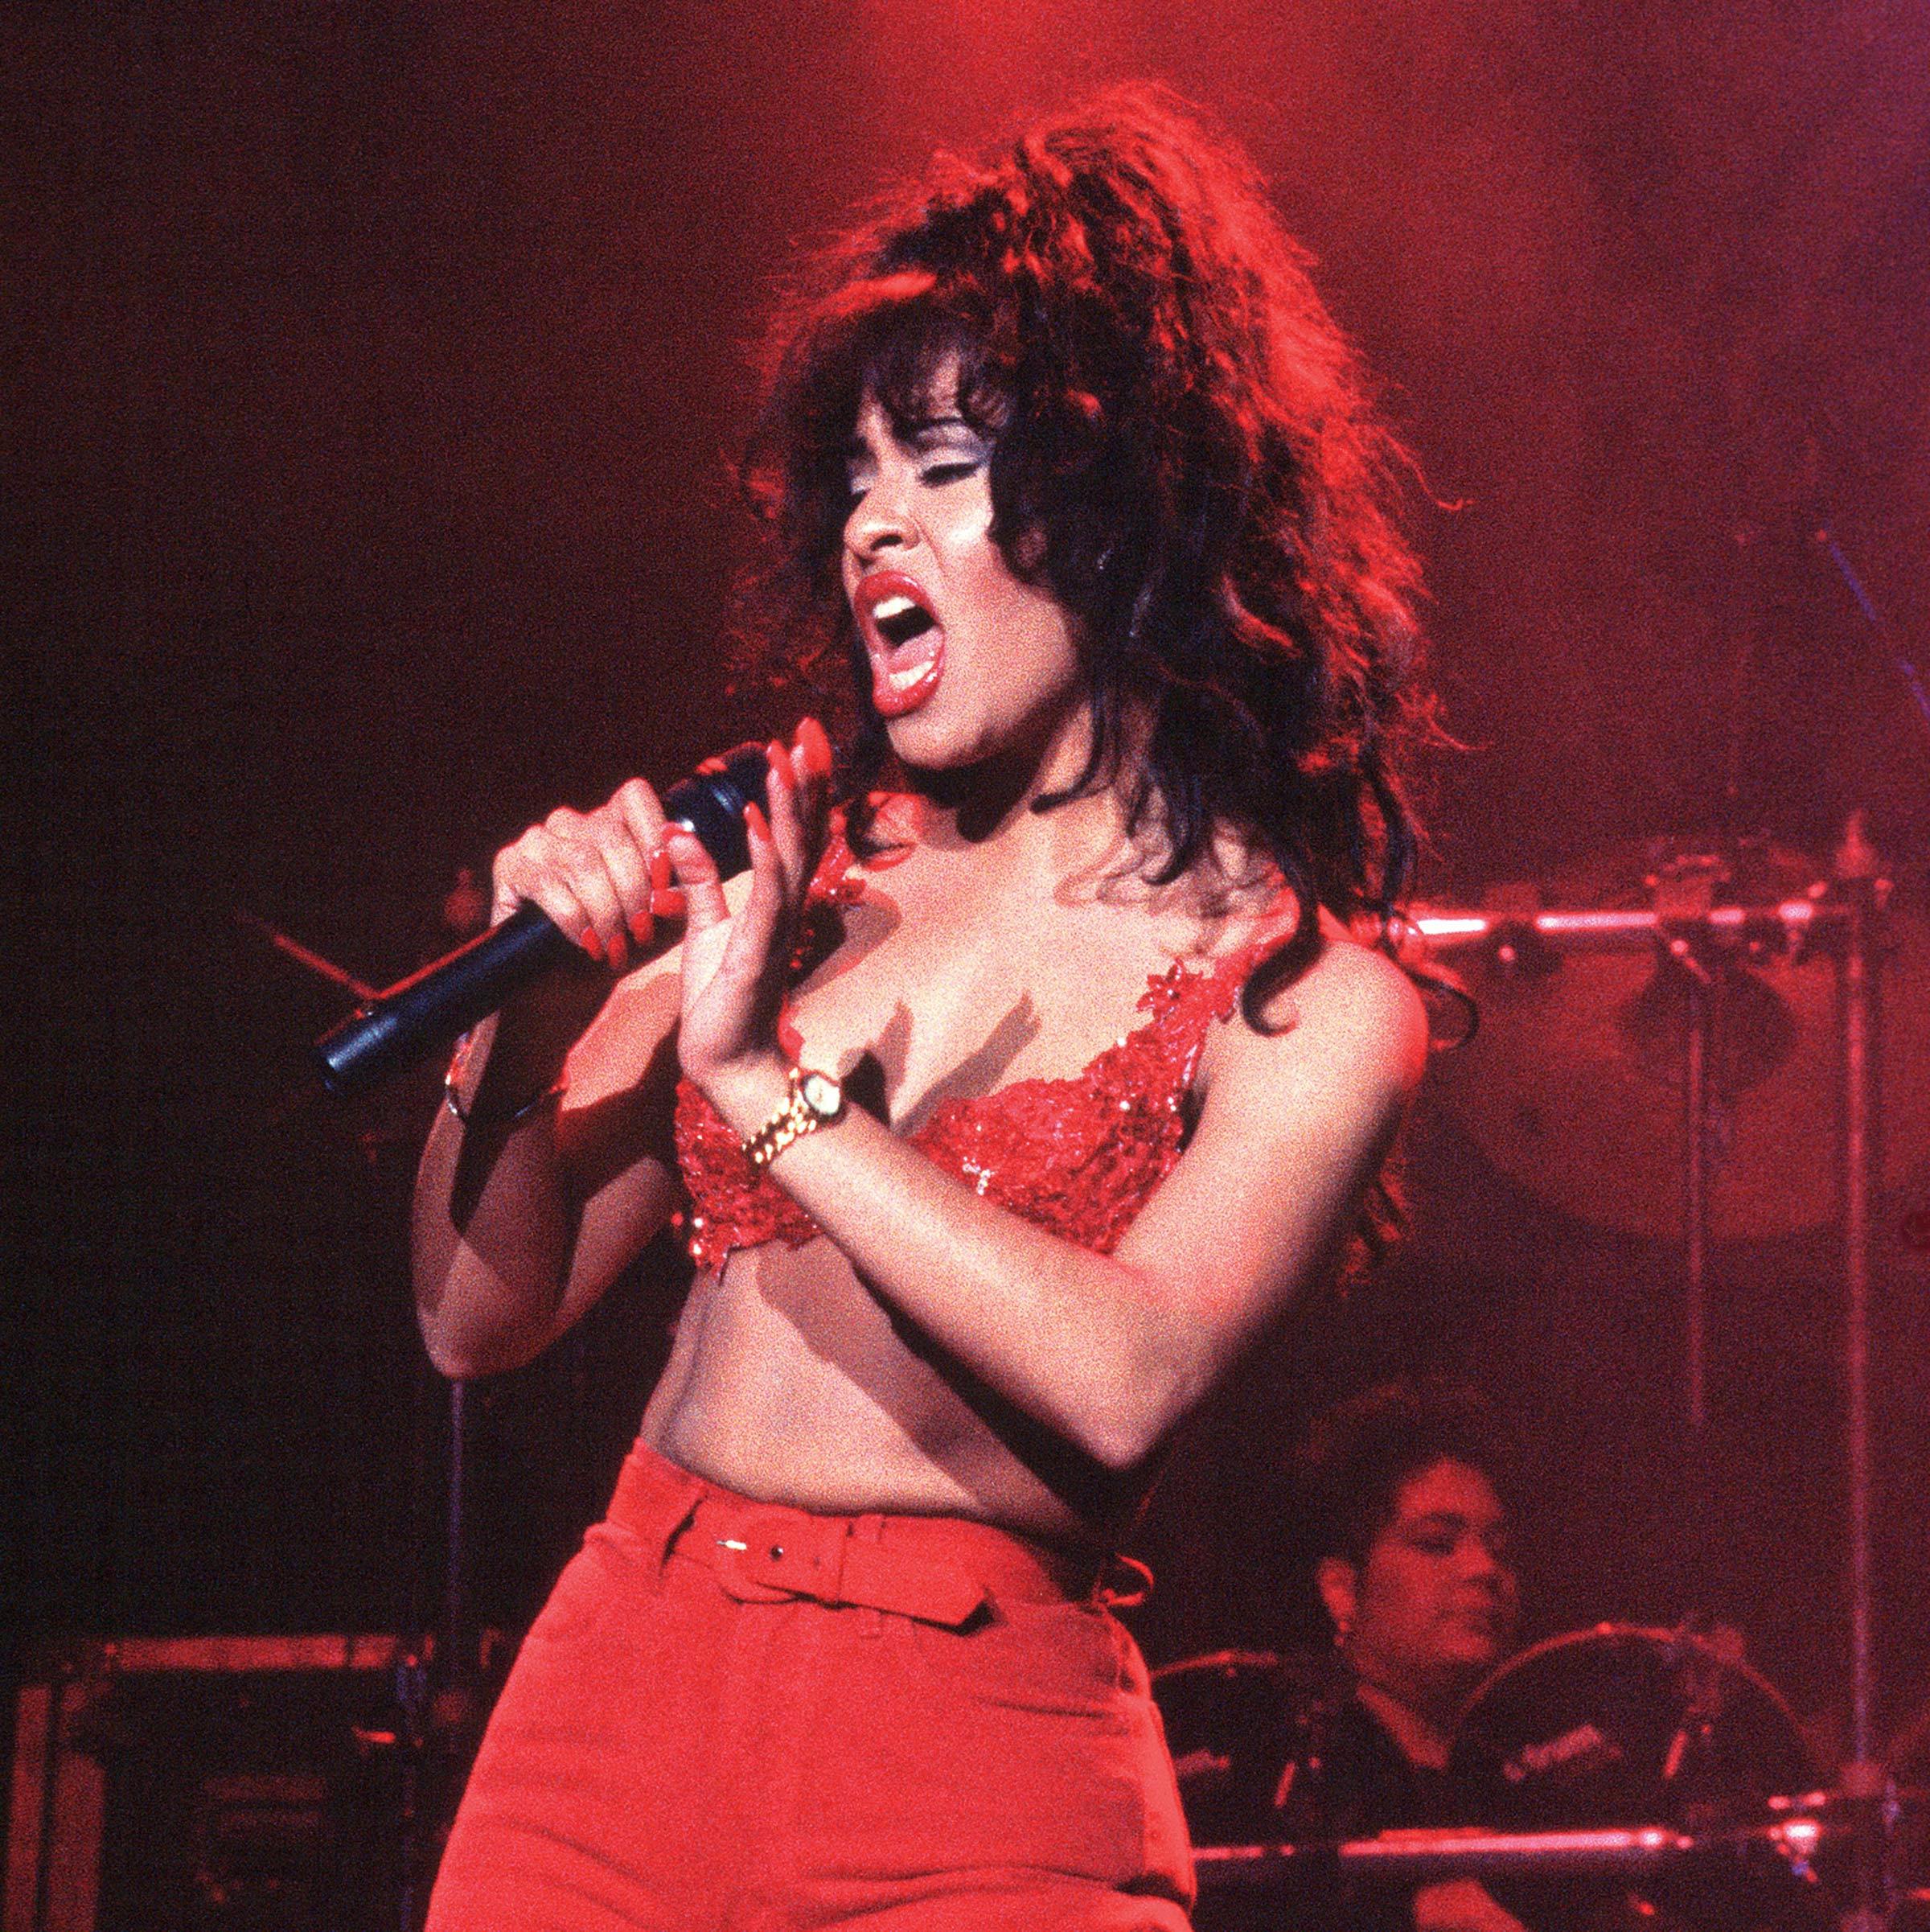 Selena, with a teased updo, performing in all red. 